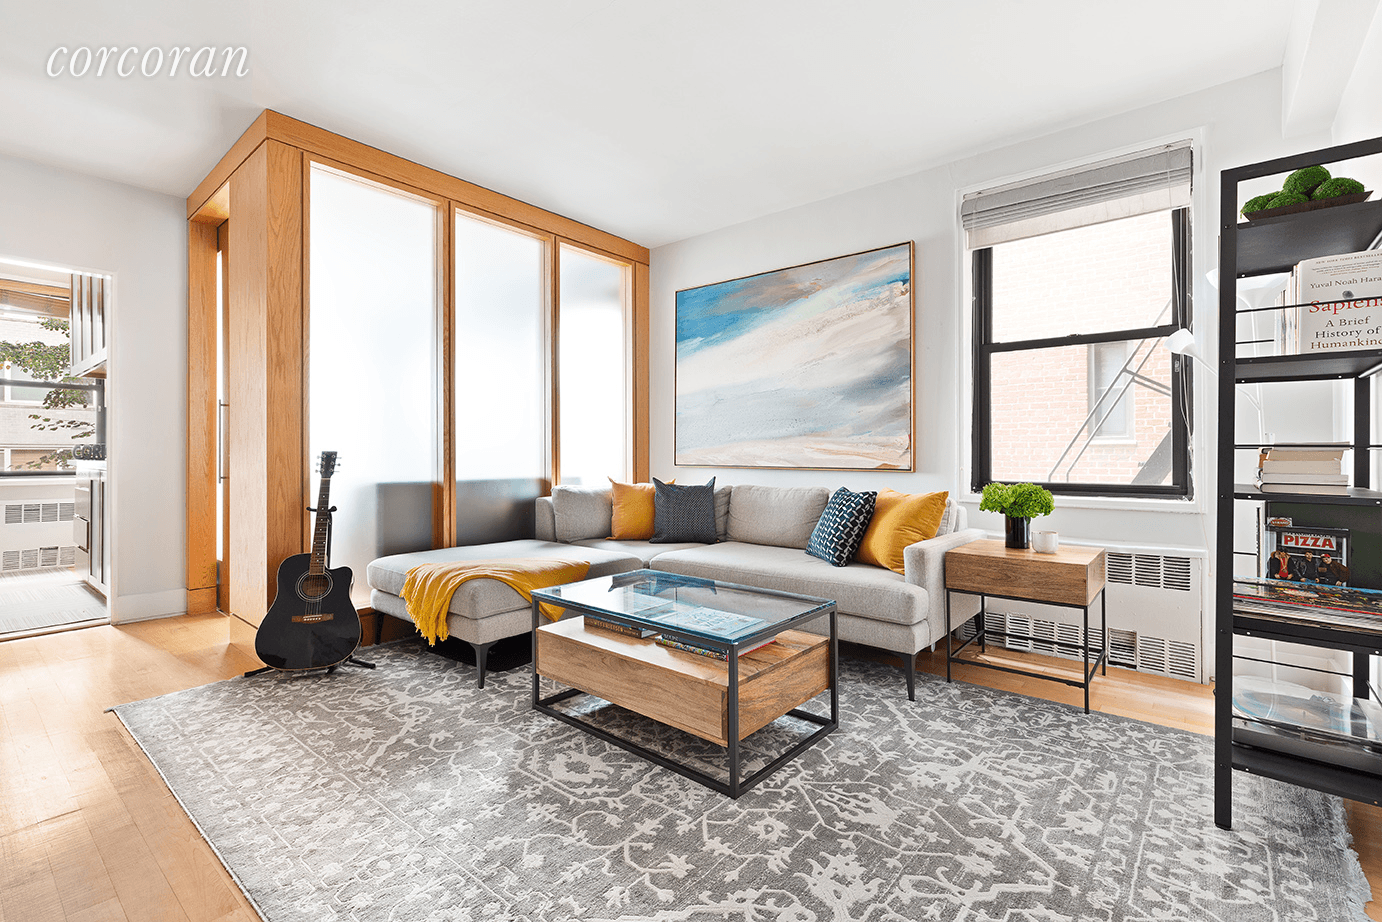 Located in the heart of Greenwich Village, this renovated 1 Bedroom Doorman Coop, offers generous storage, modern finishes, and a spacious living space.